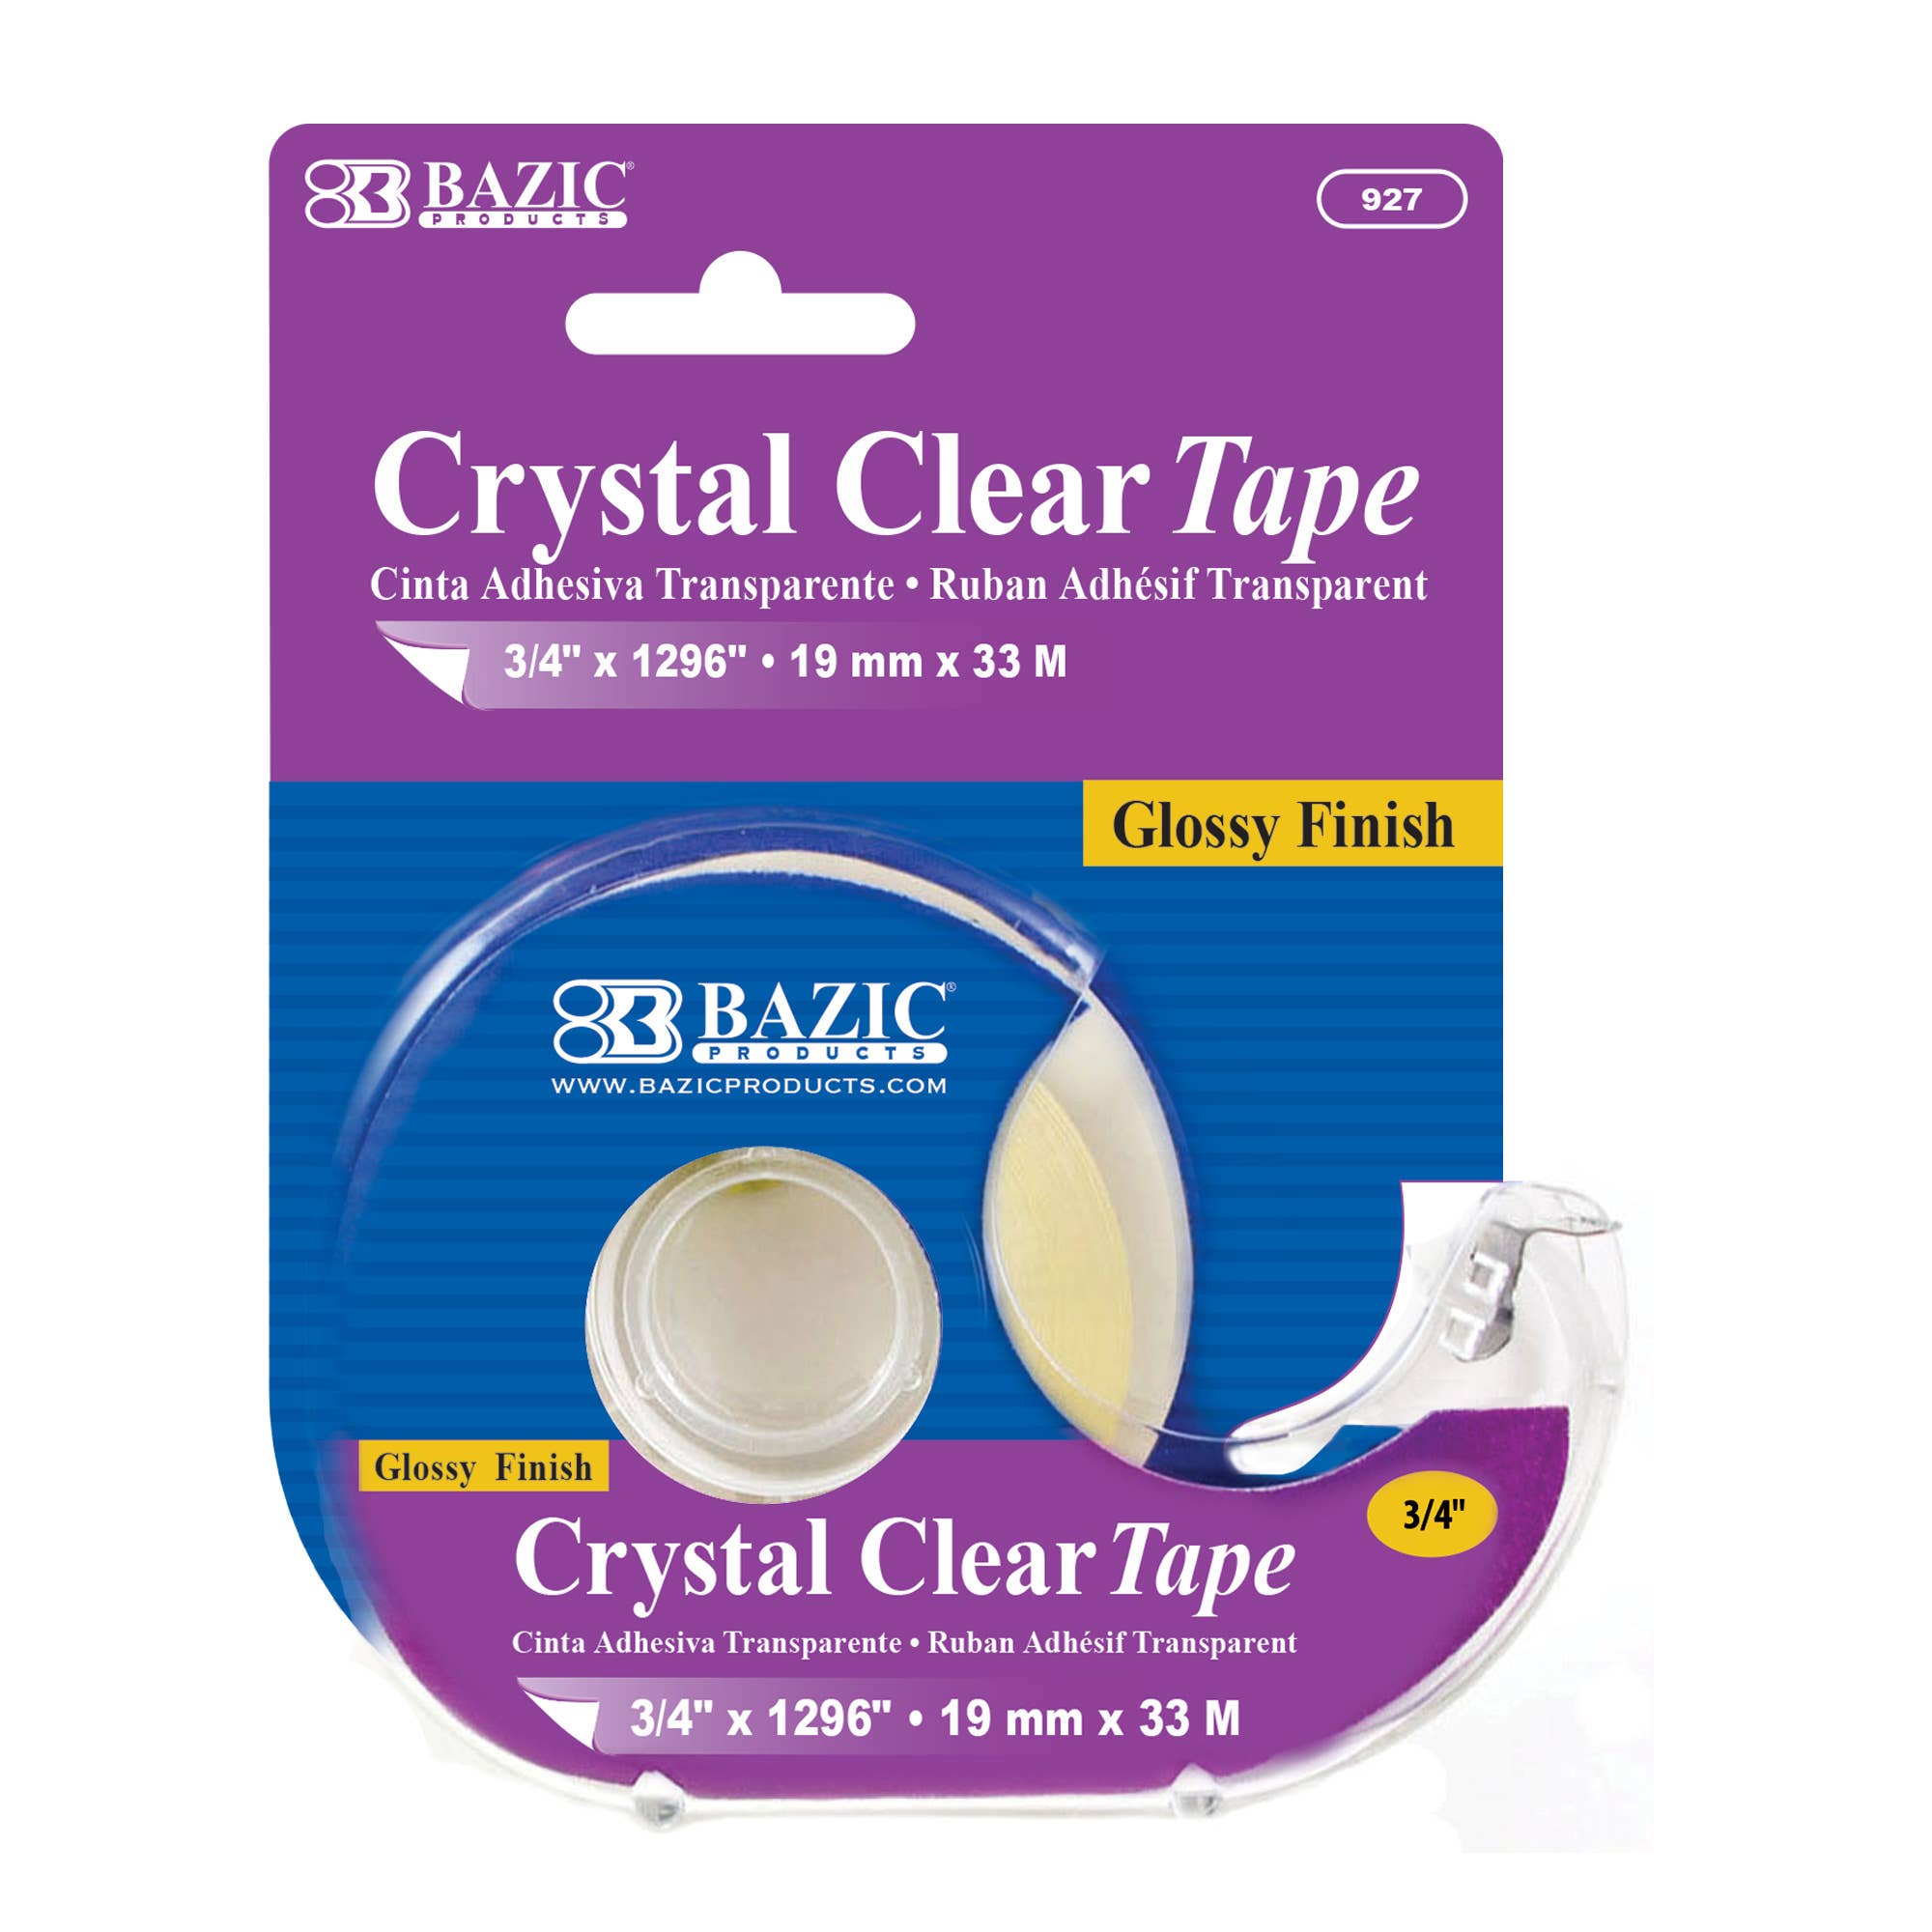 Crystal Clear Tape Dispenser 3/4" X 1296"